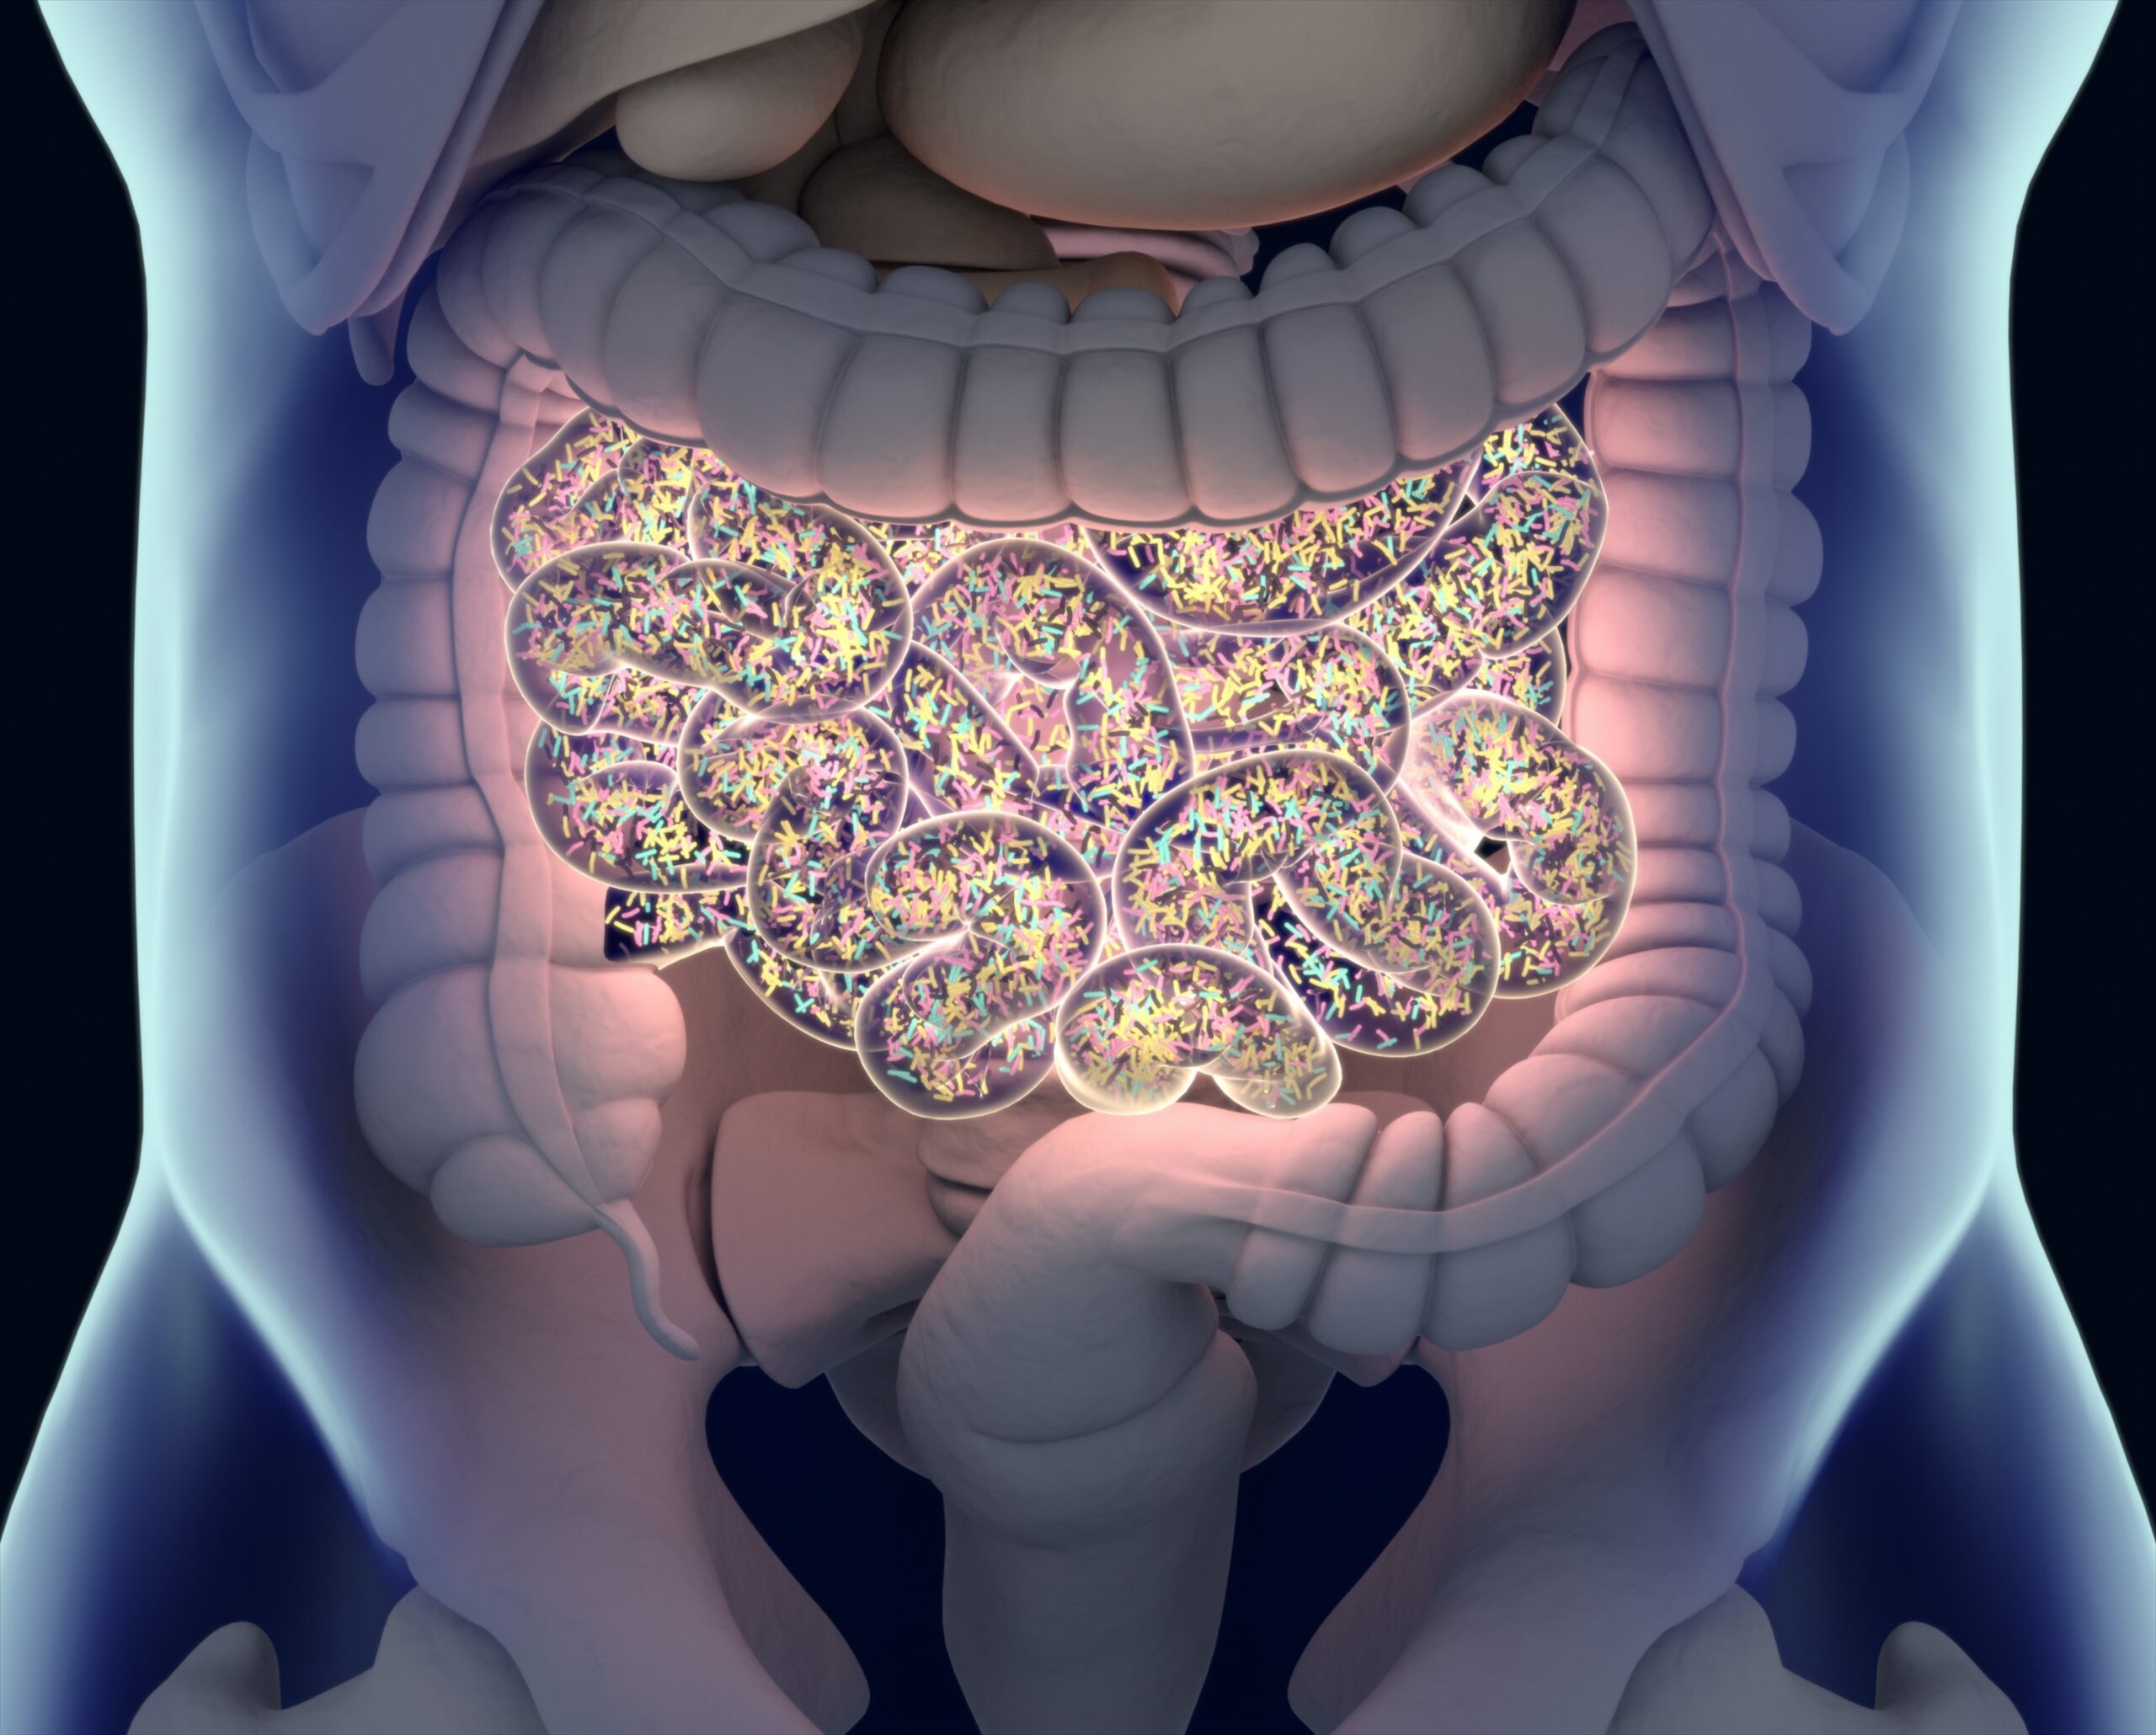 Leaky Gut Syndrome: What It Is, How To Diagnose It, And Steps To Improve Gut Health